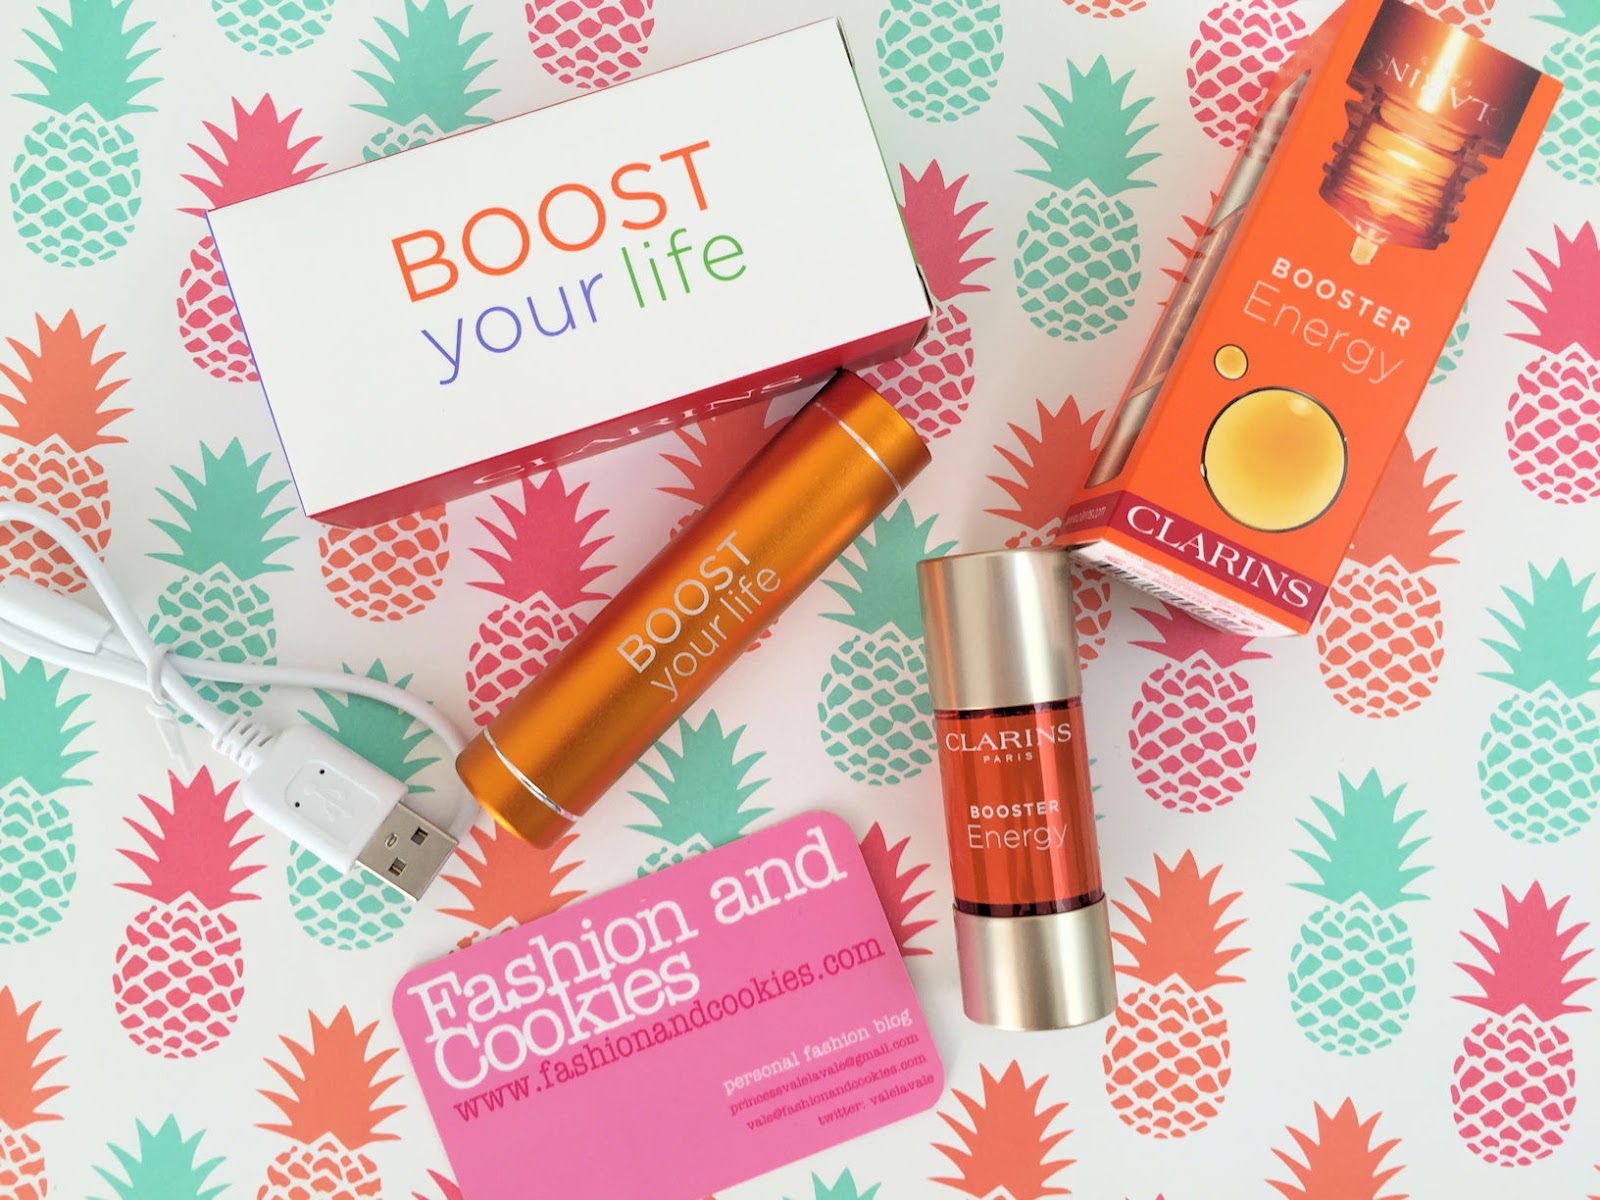 Clarins Booster Energy review on Fashion and Cookies beauty blog, beauty blogger